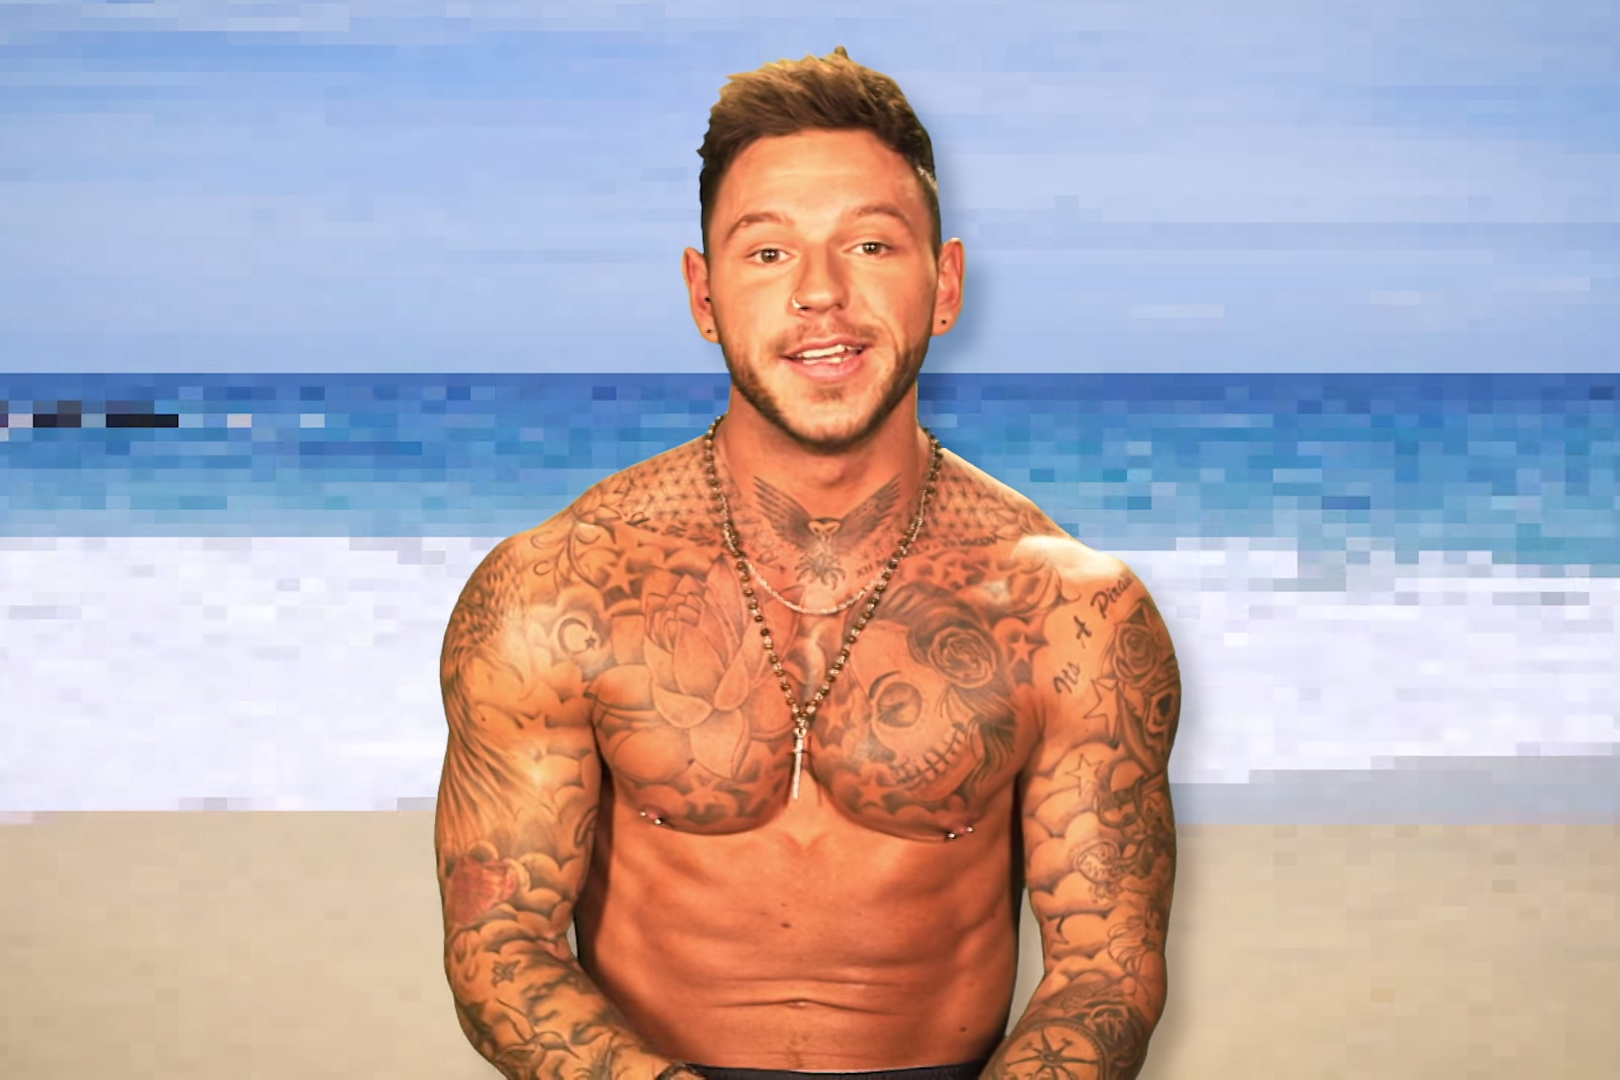 Sean, who appeared on the MTV reality series ‘Ex on the Beach’ in 2017, is now in the top 0.6 per cent of earners on OnlyFans